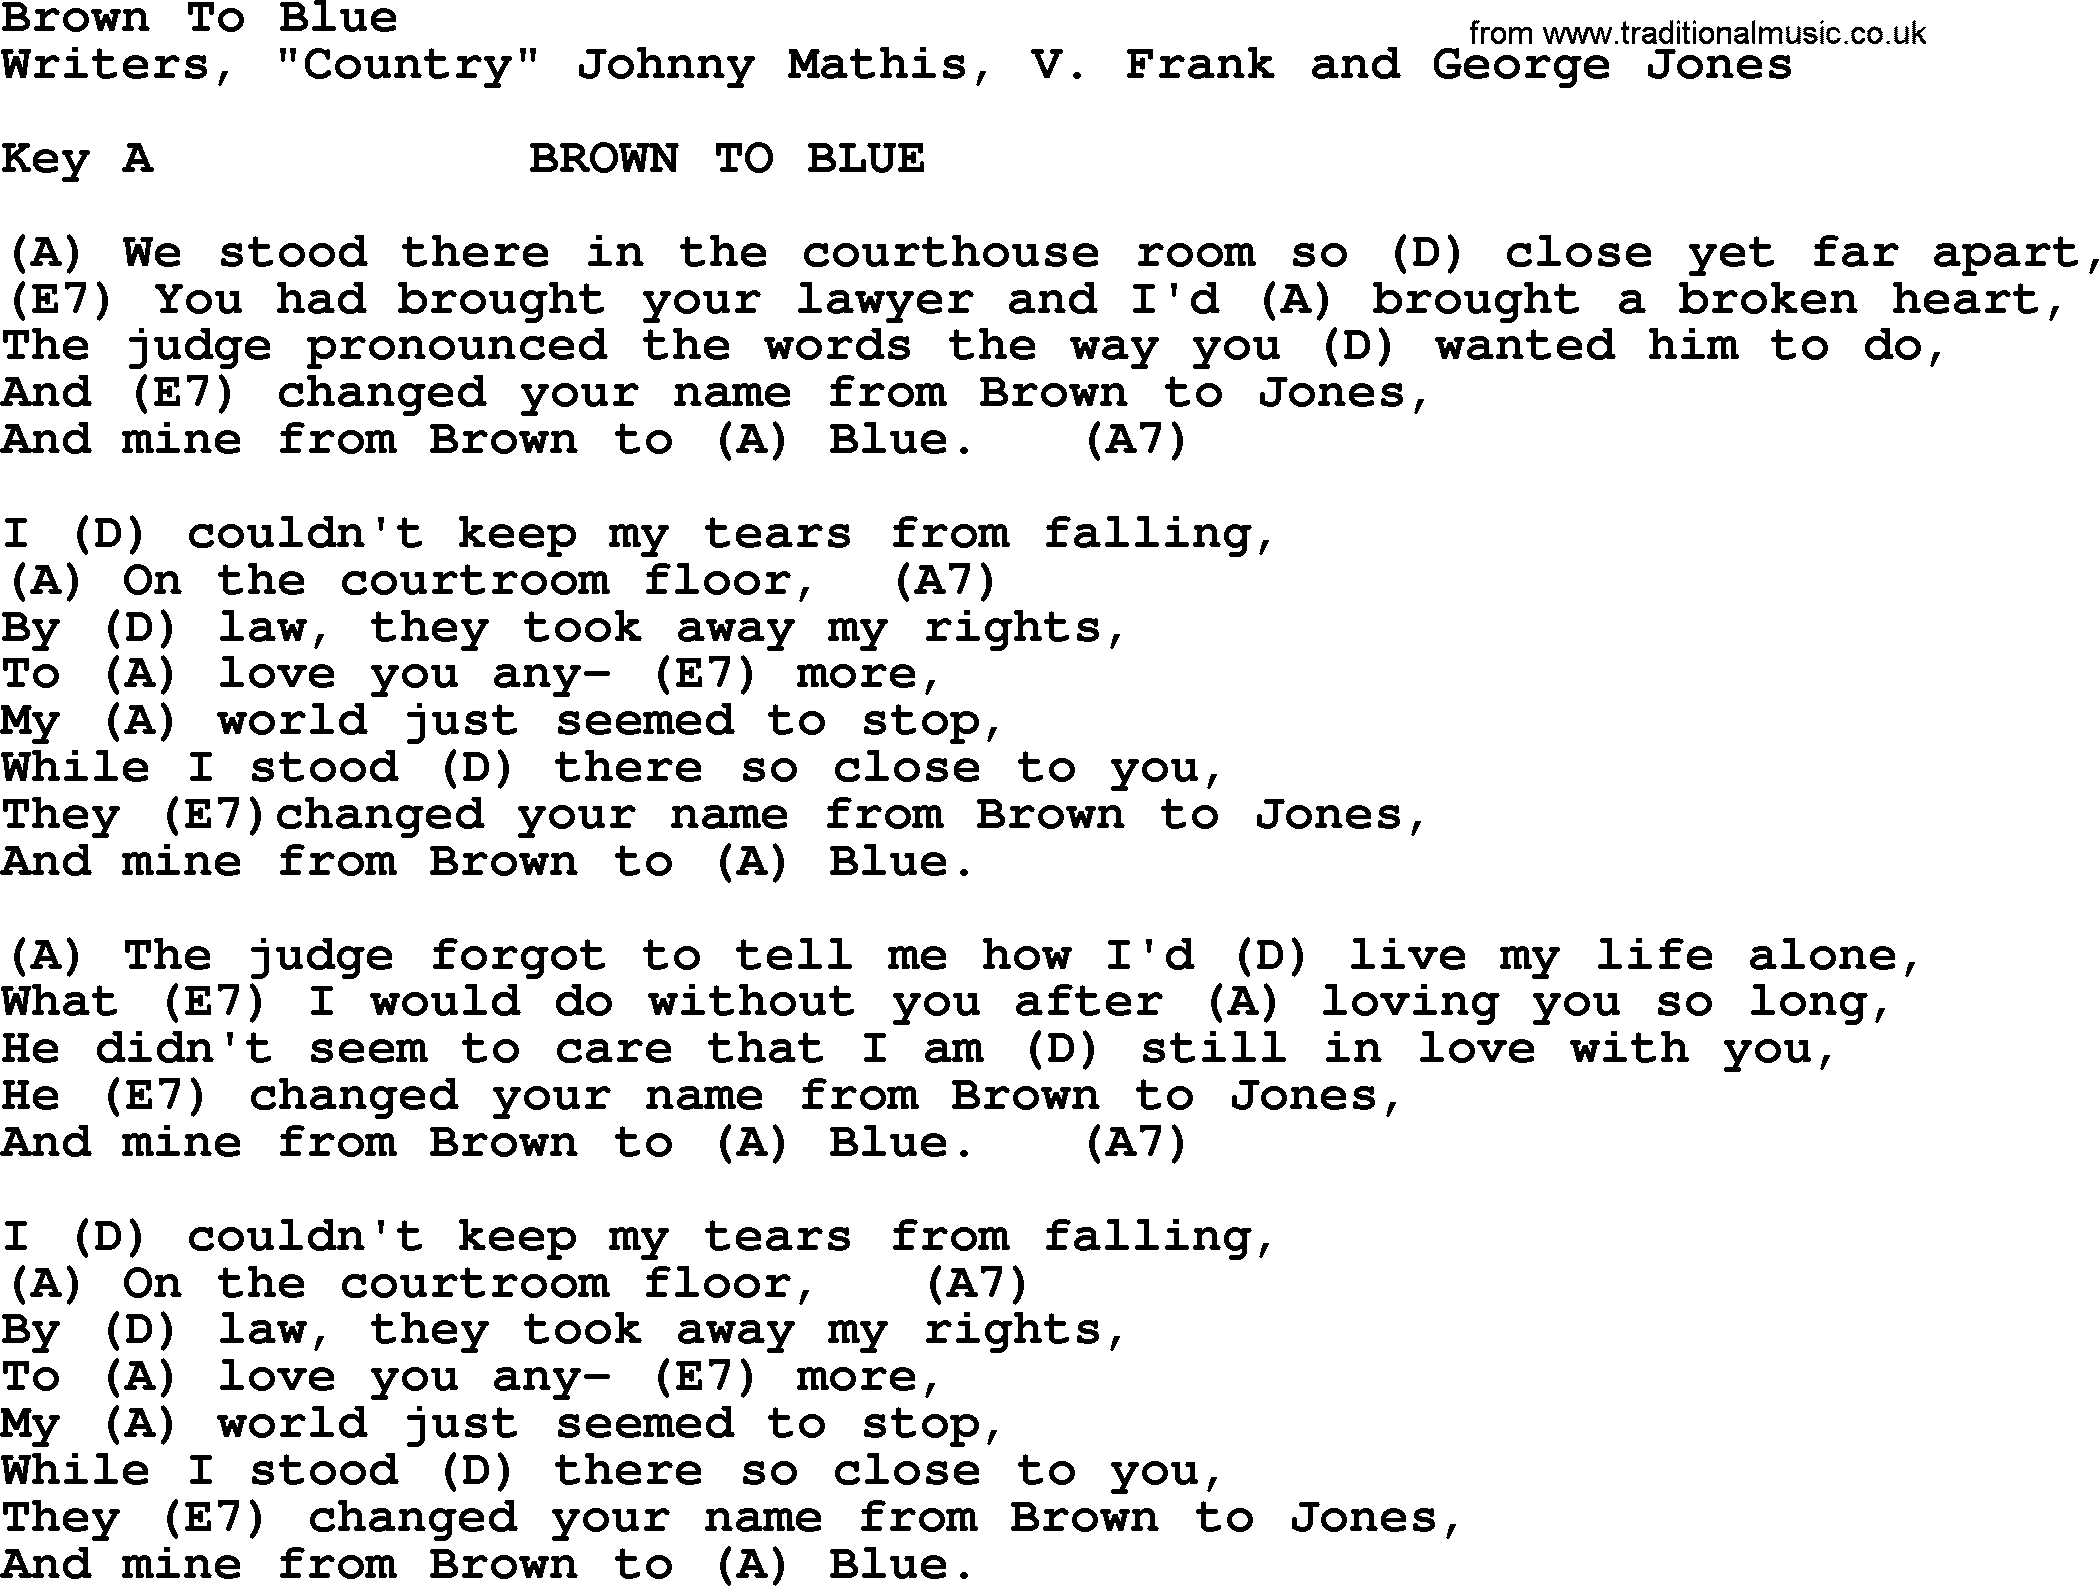 George Jones song: Brown To Blue, lyrics and chords